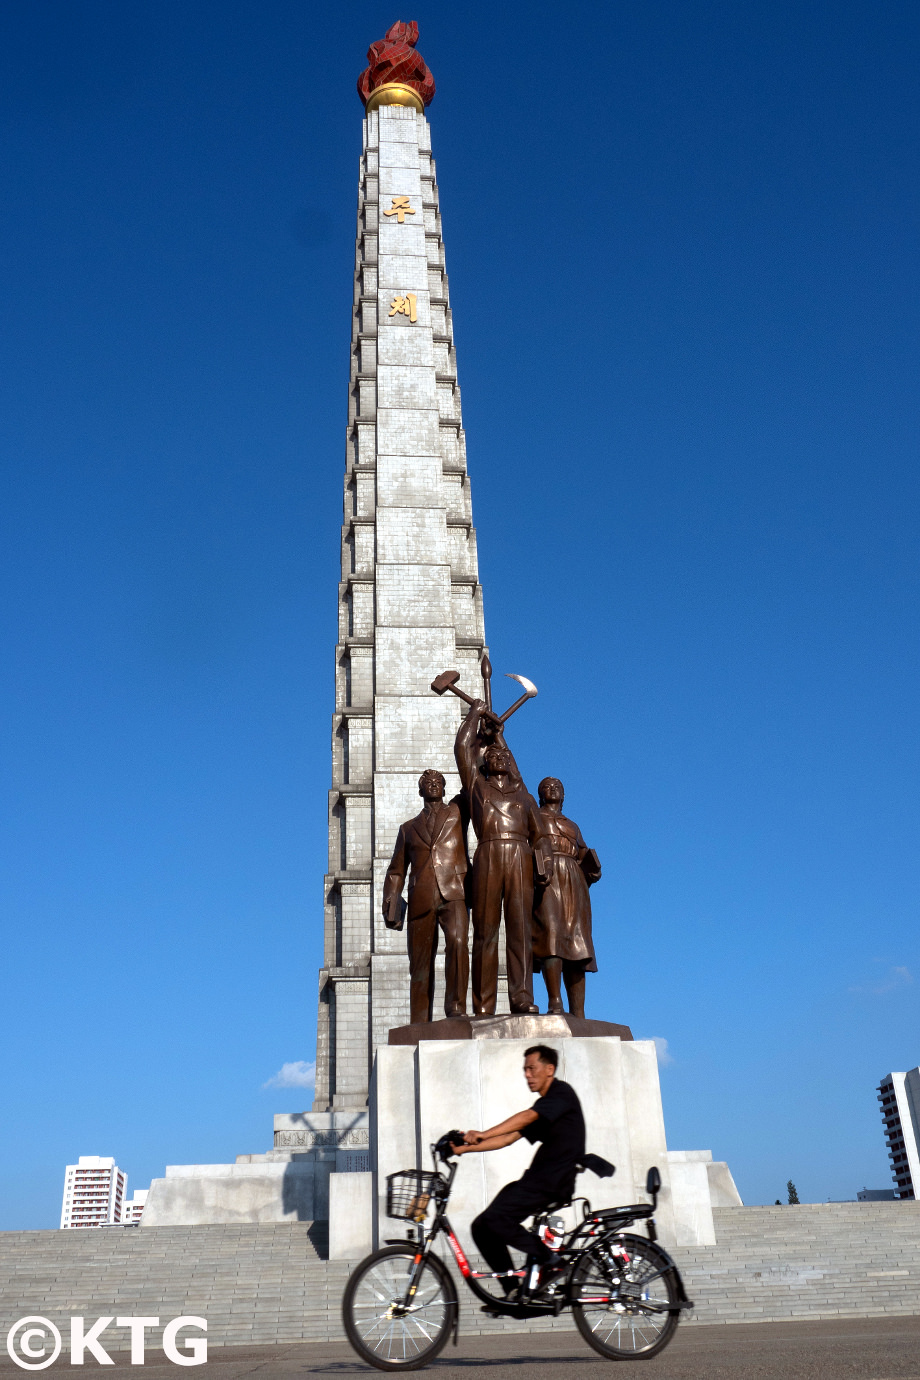 Juche Tower in Pyongyang, picture taken by KTG Tours